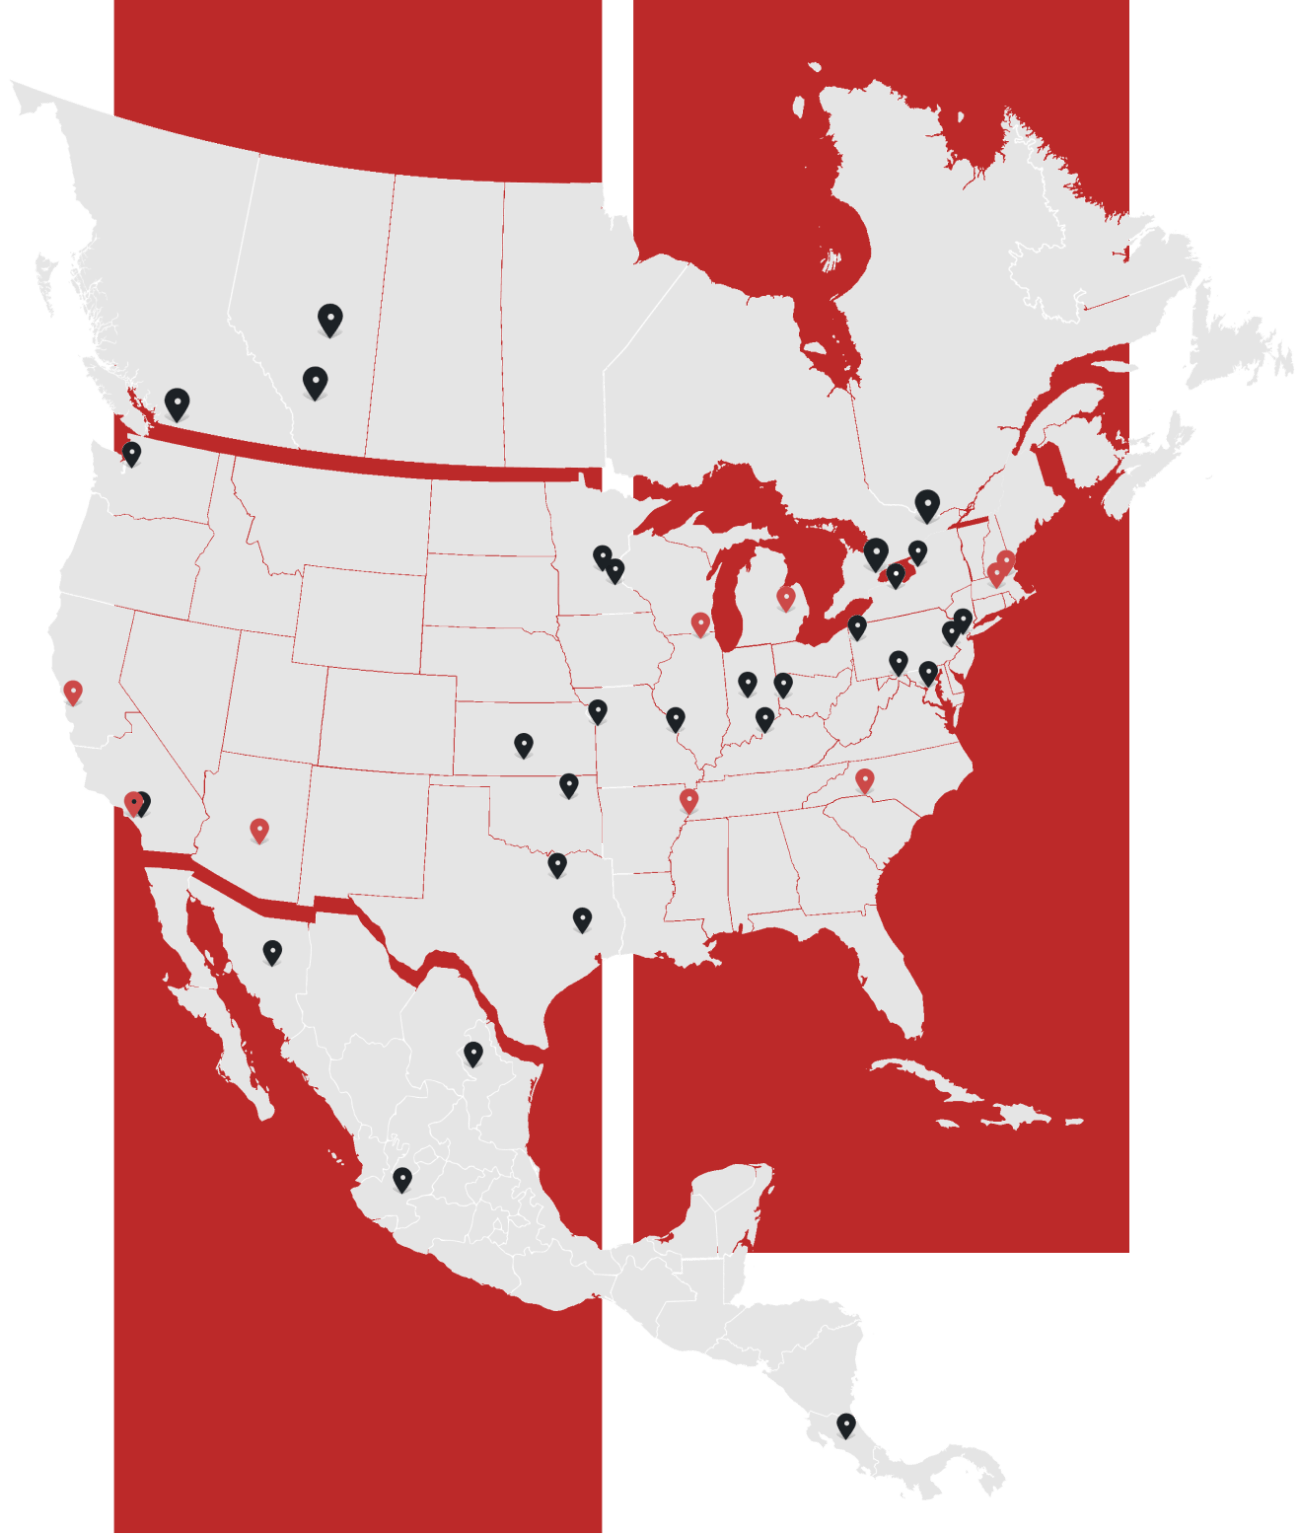 Illustration map of Methods locations in the United States, Canada, and Mexico.